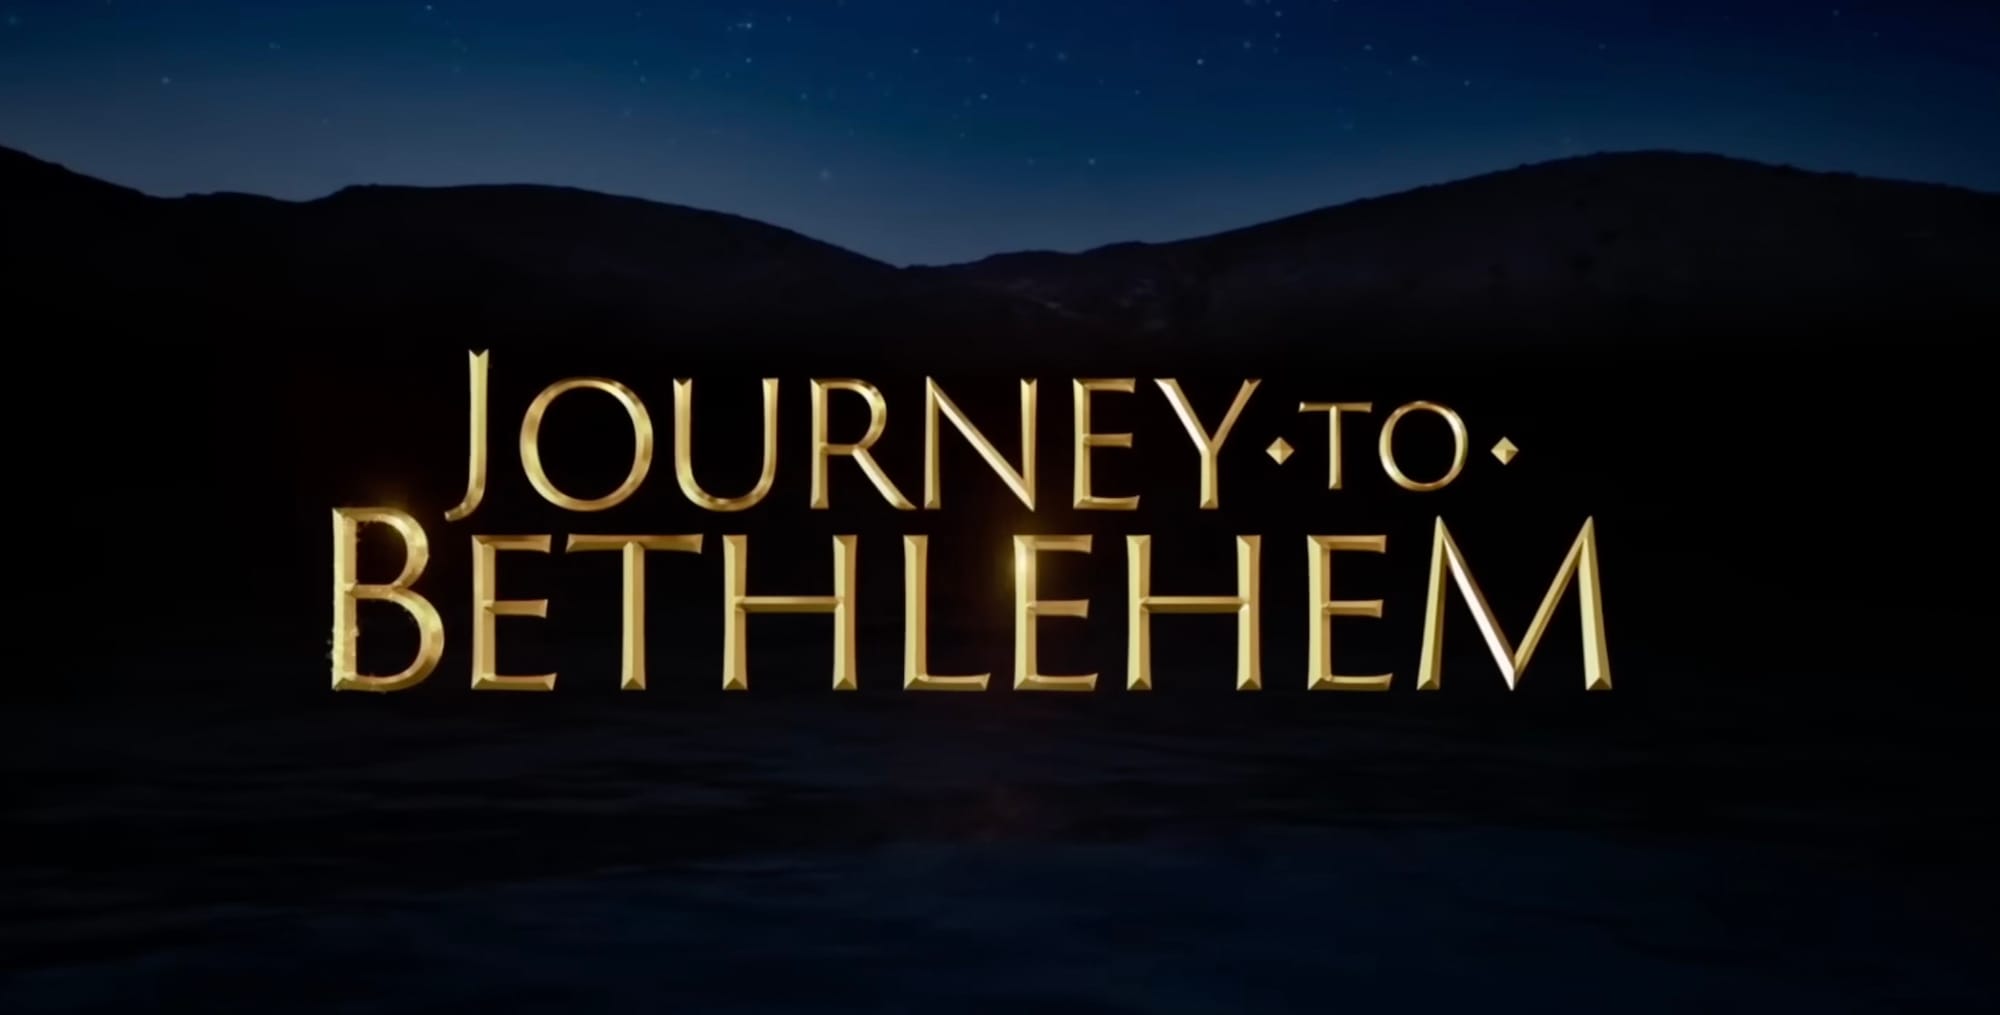 Journey to Bethlehem Takes Liberties With Timeless Nativity Story, for the Sake of Modern Themes